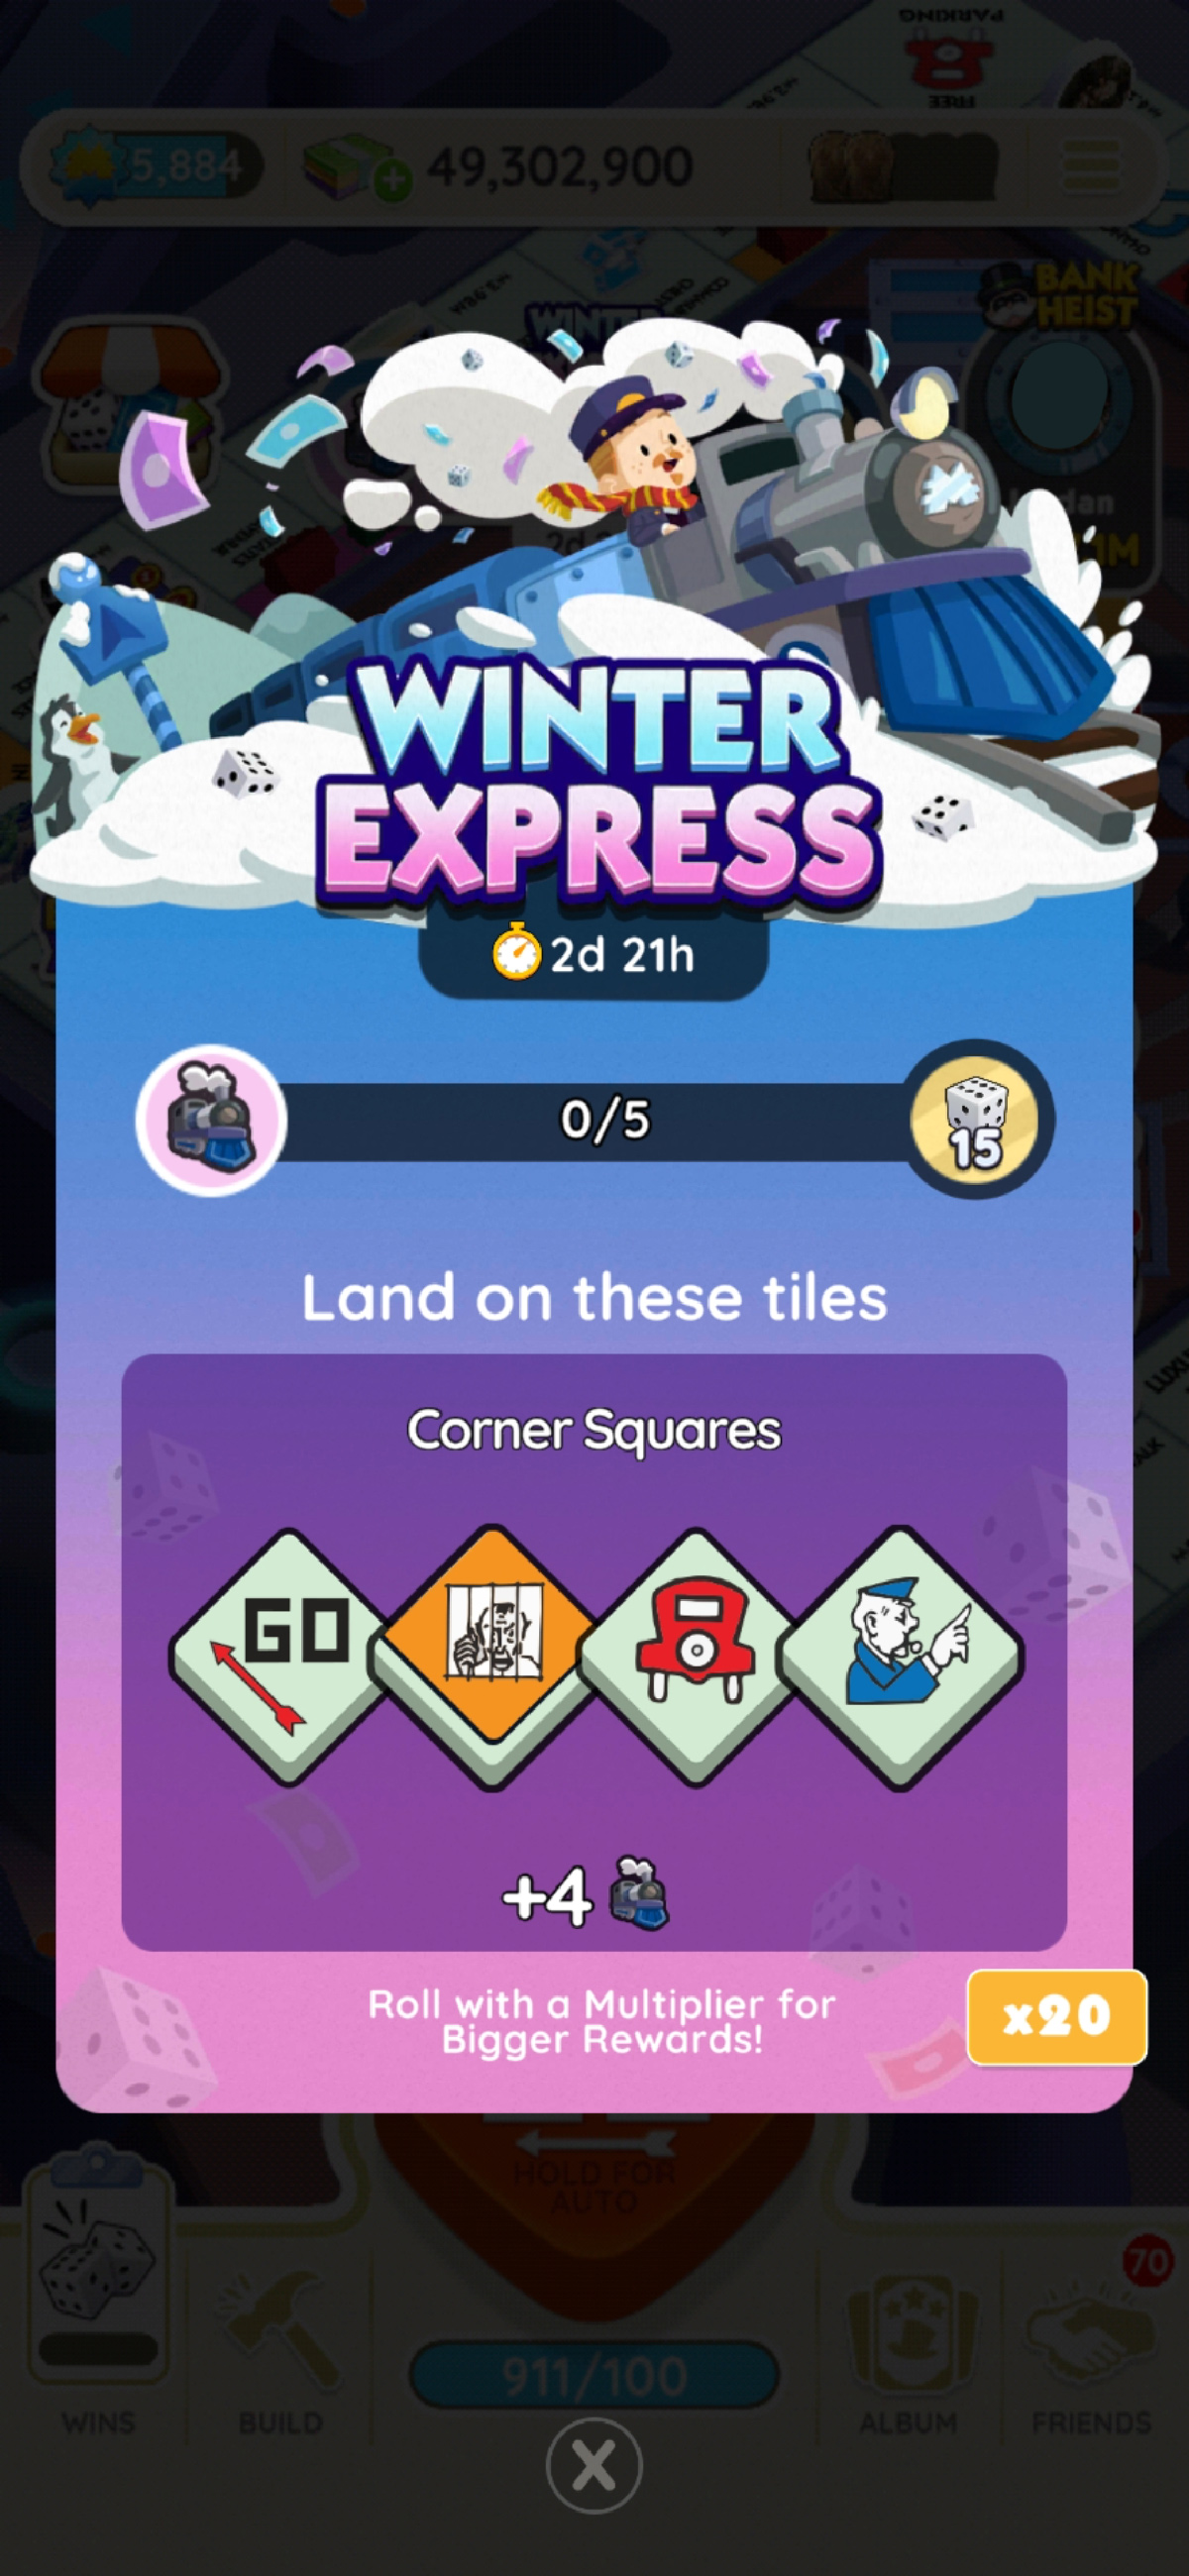 An image for the Winter Express event in Monopoly GO showing a man riding a train that cash is flying out of, which is part of an article on all the rewards and milestones for the event.